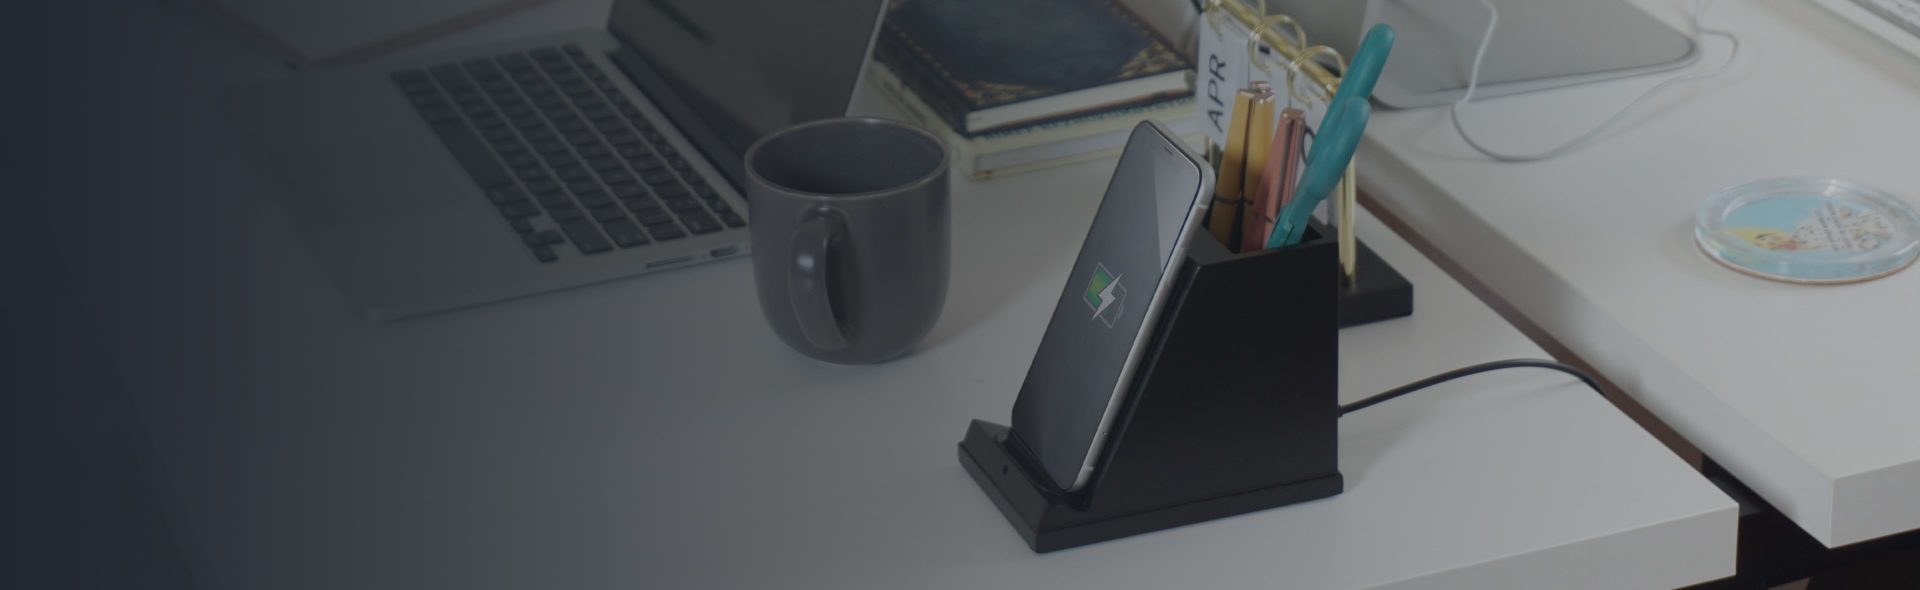 A phone is sitting on top of a charging station, on top of a desk